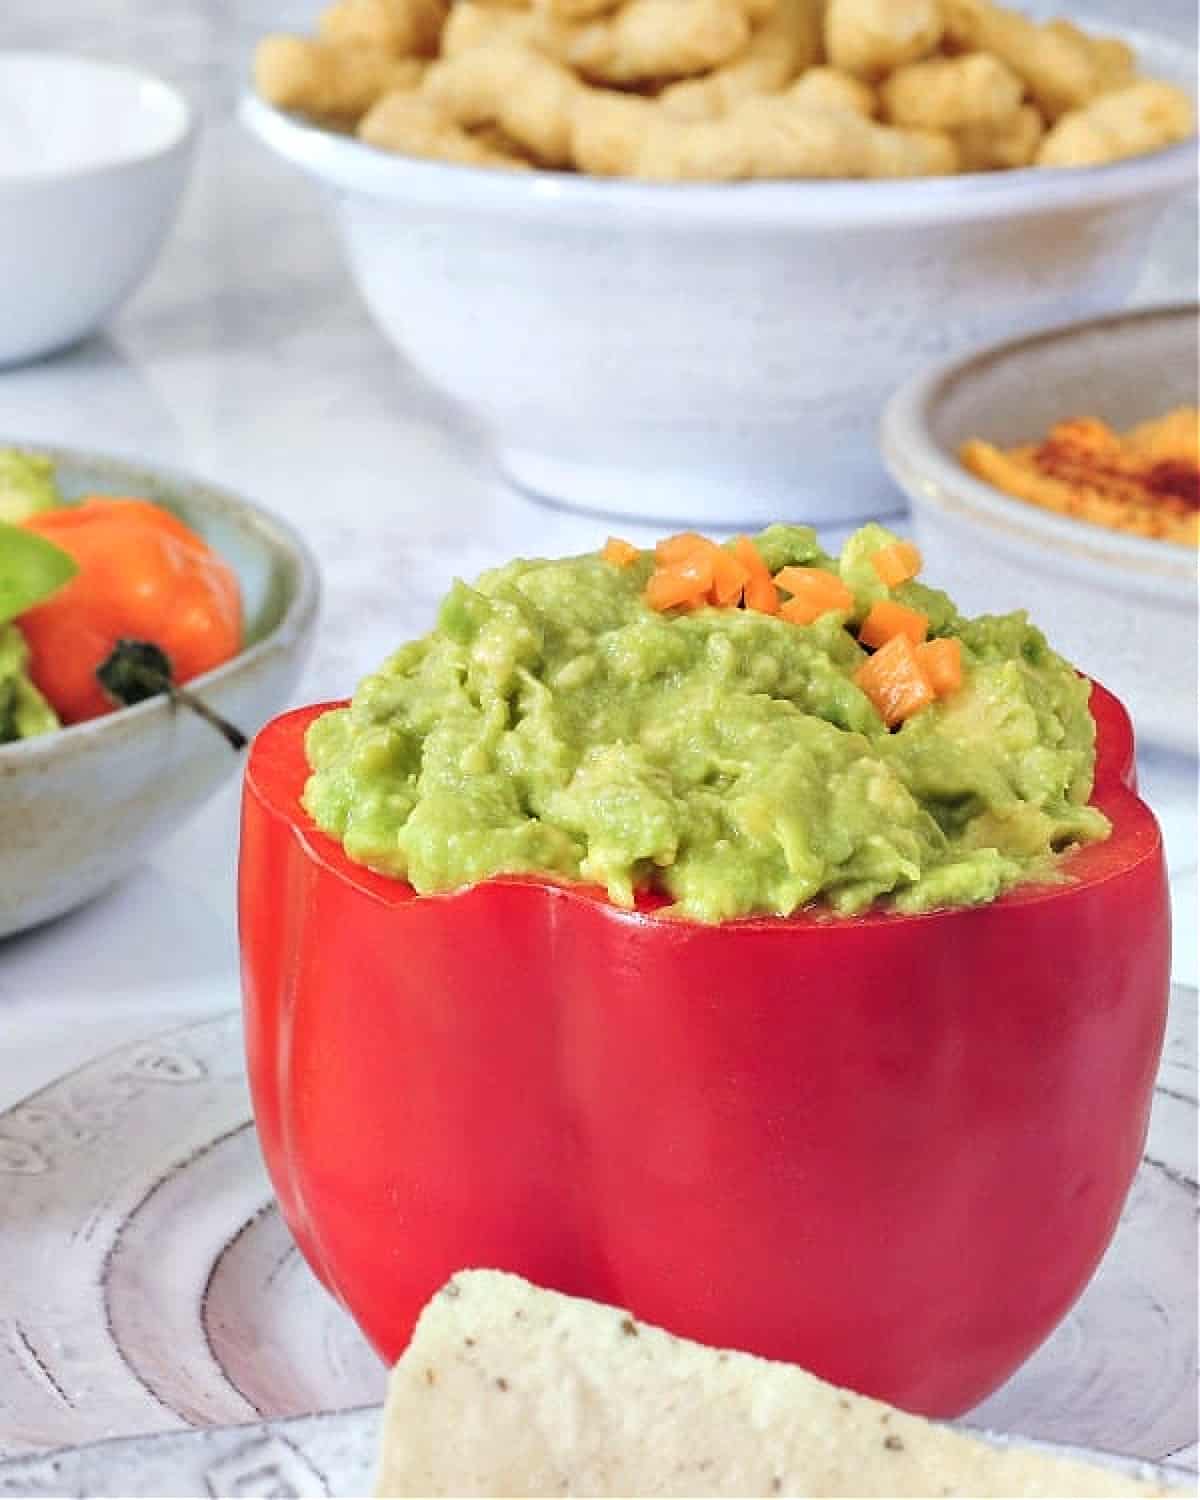 Mango habanero guacamole served in a hollowed out red bell pepper. A smaller bowl of crackers on the side.